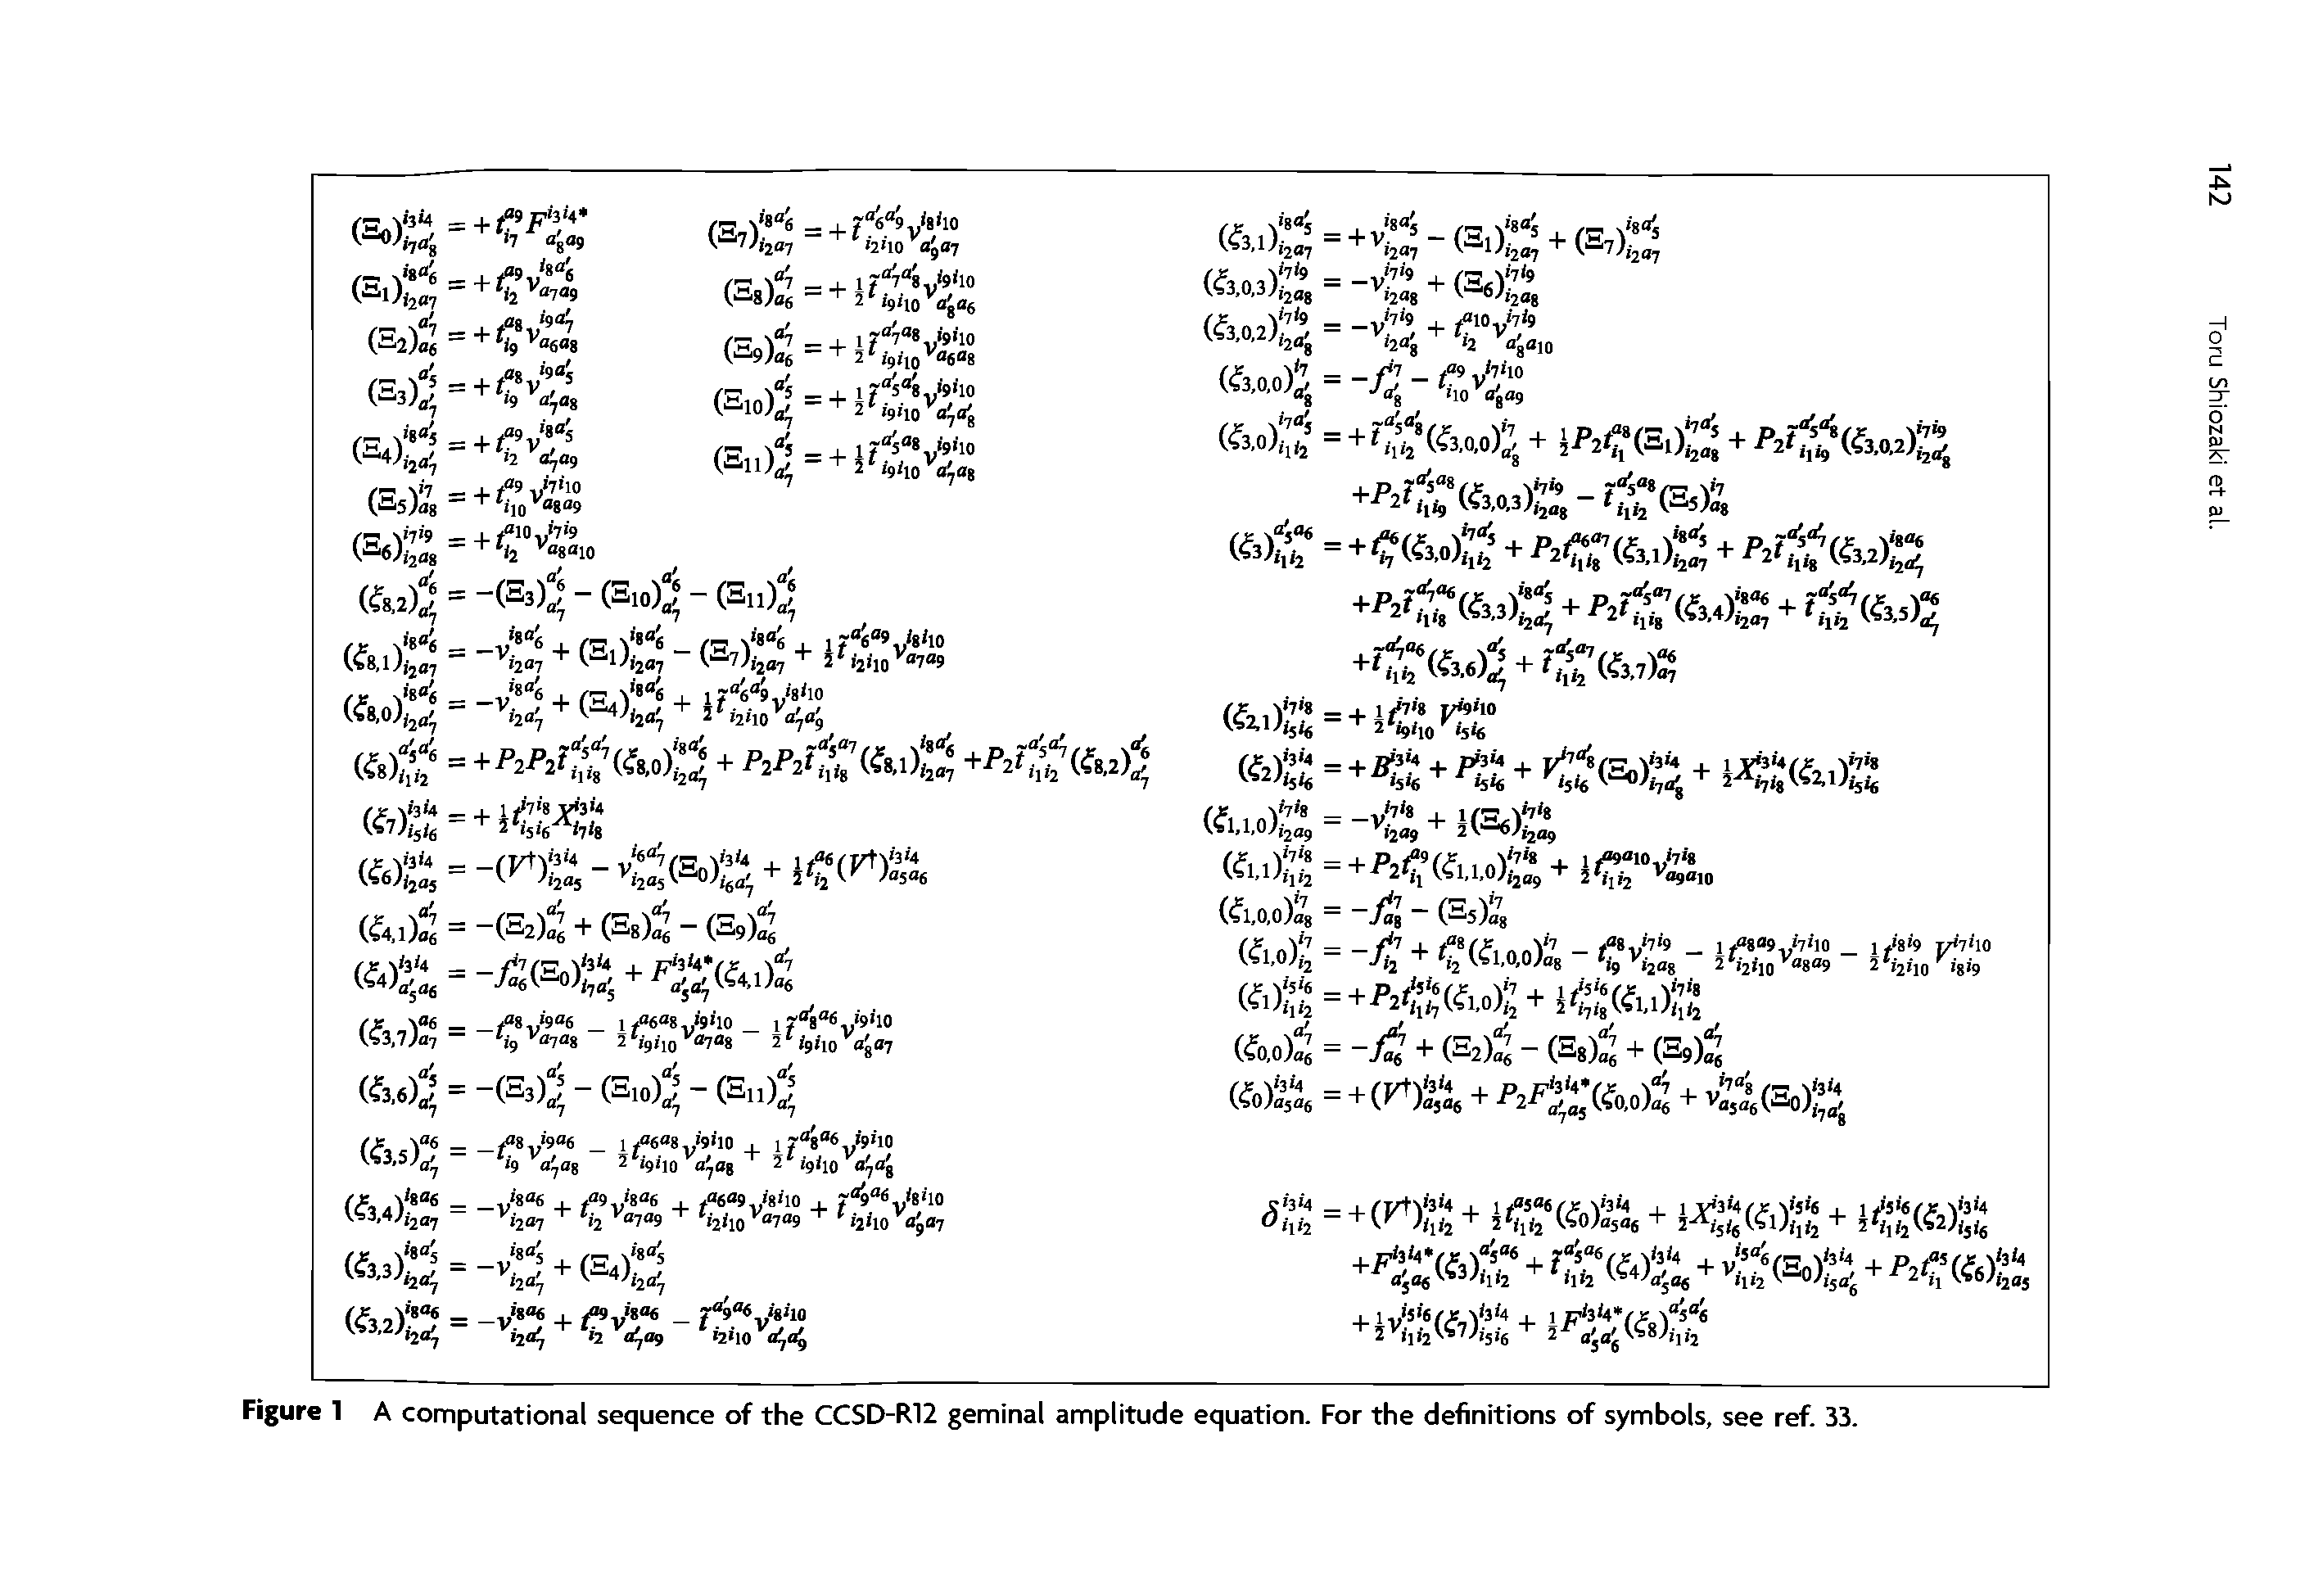 Figure 1 A computational sequence of the CCSD-R12 geminal amplitude equation. For the definitions of symbols, see ref. 33.